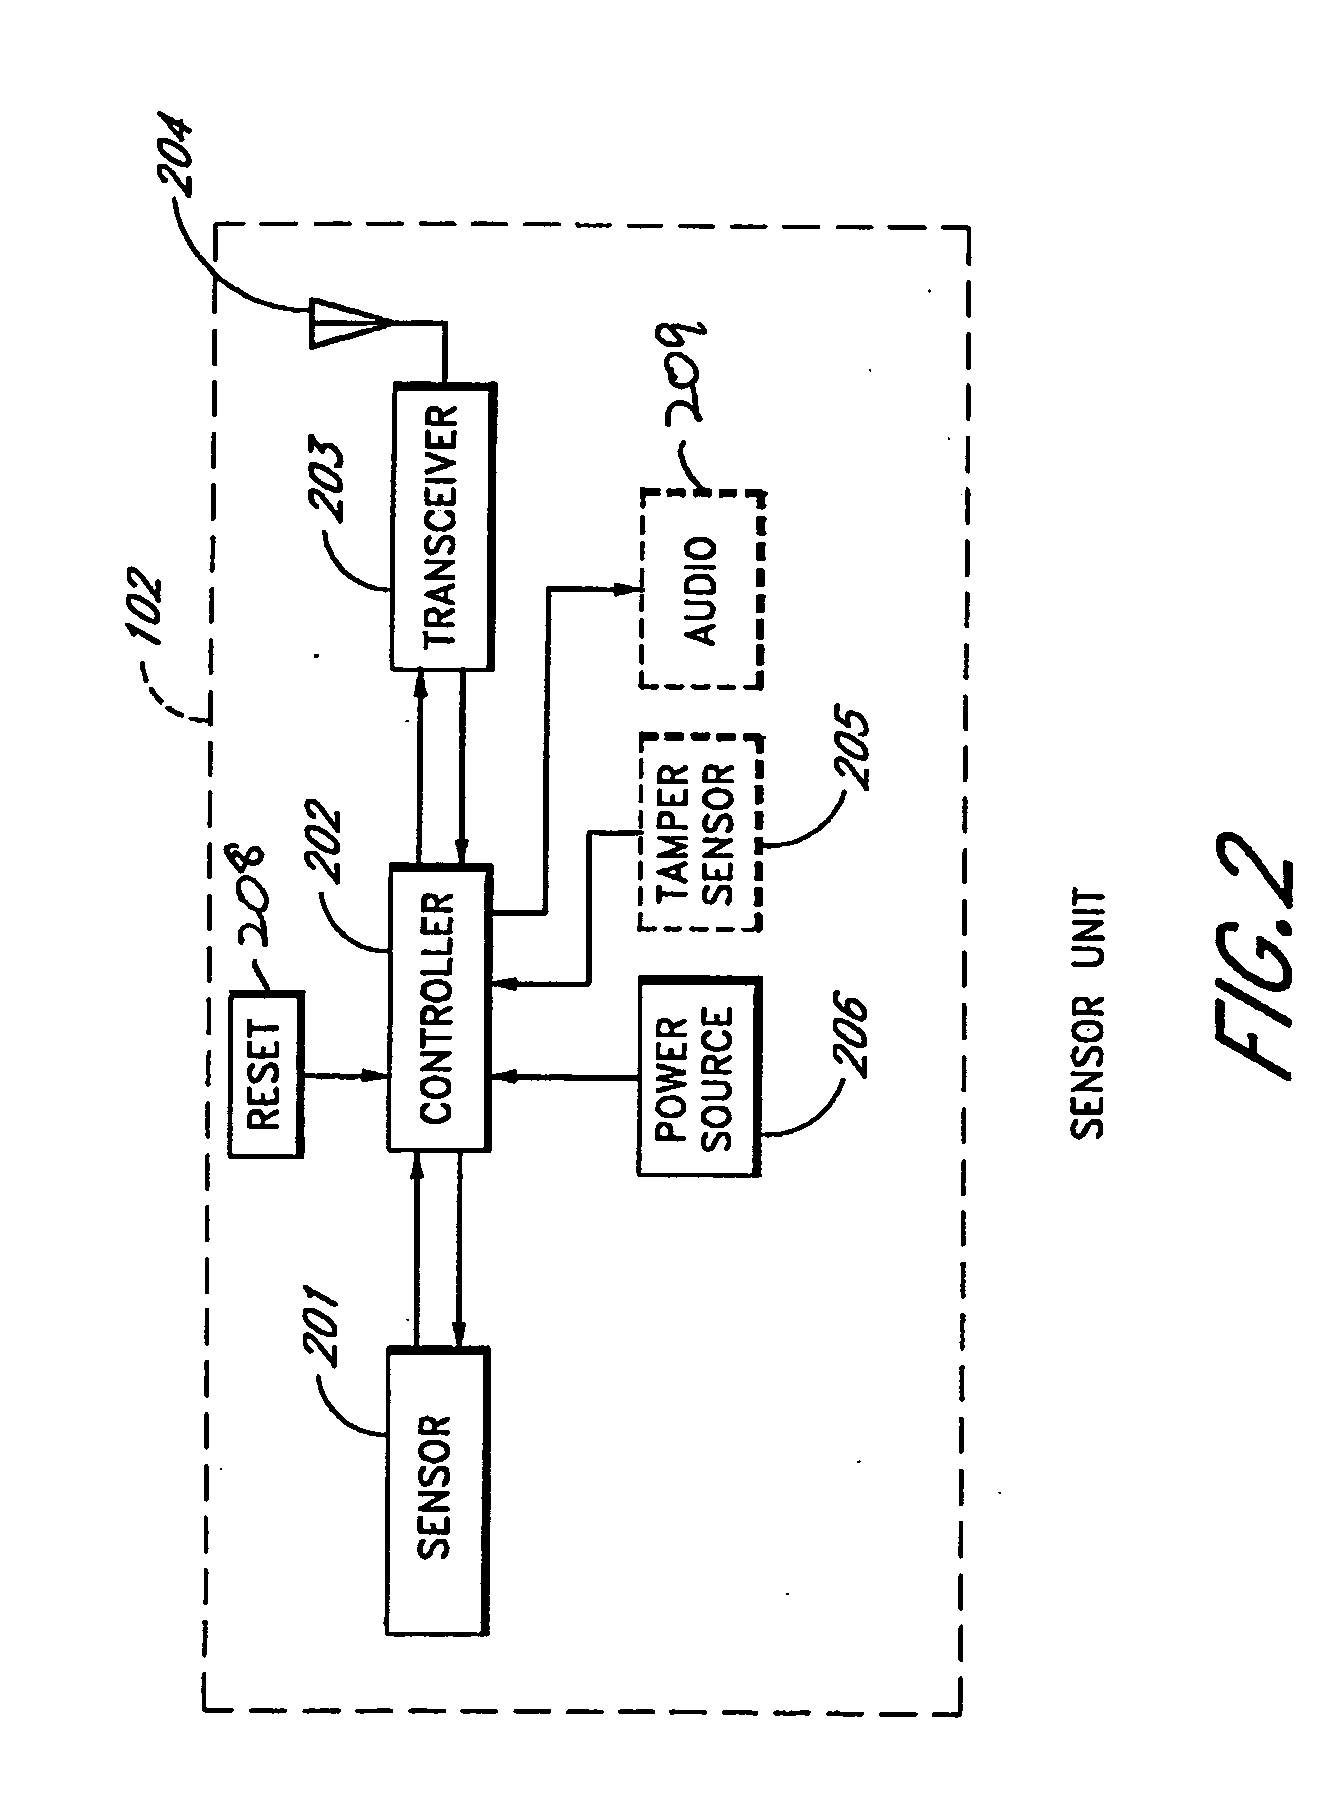 Method and apparatus for detecting water leaks